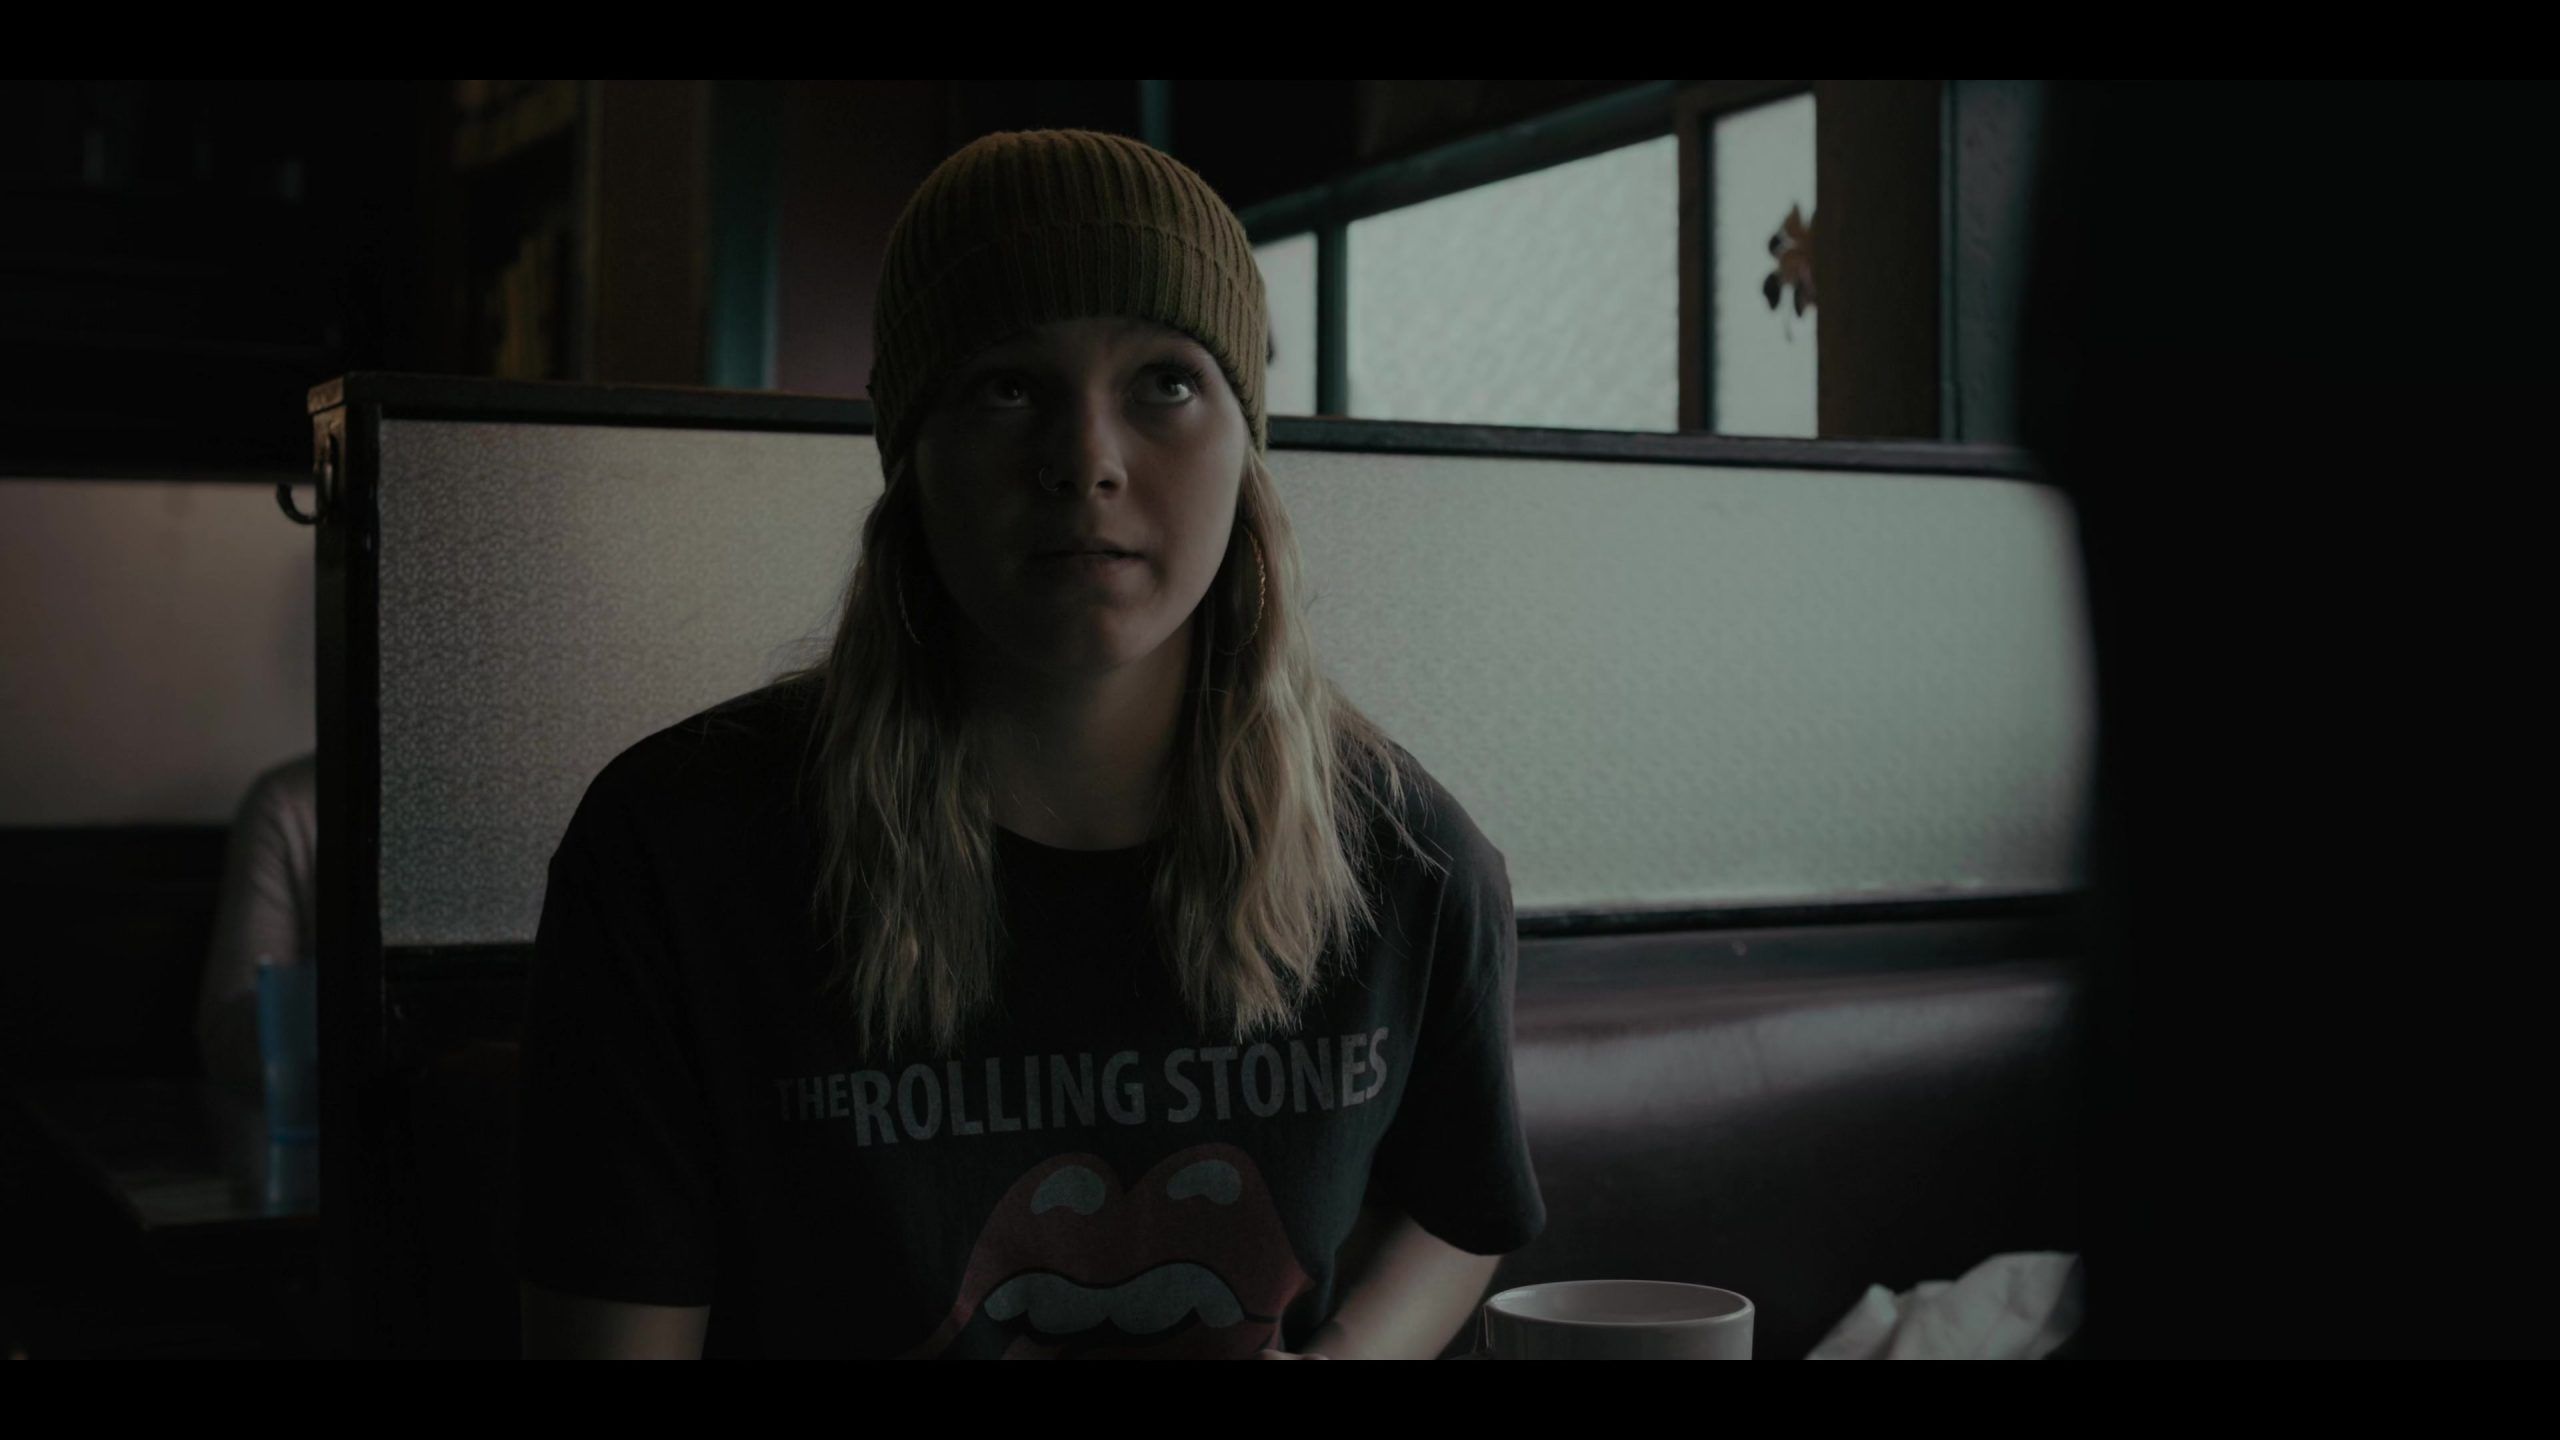 Worn on Justified: City Primeval TV Show - Rolling Stones Tee Worn by Vivian Olyphant as Willa Givens